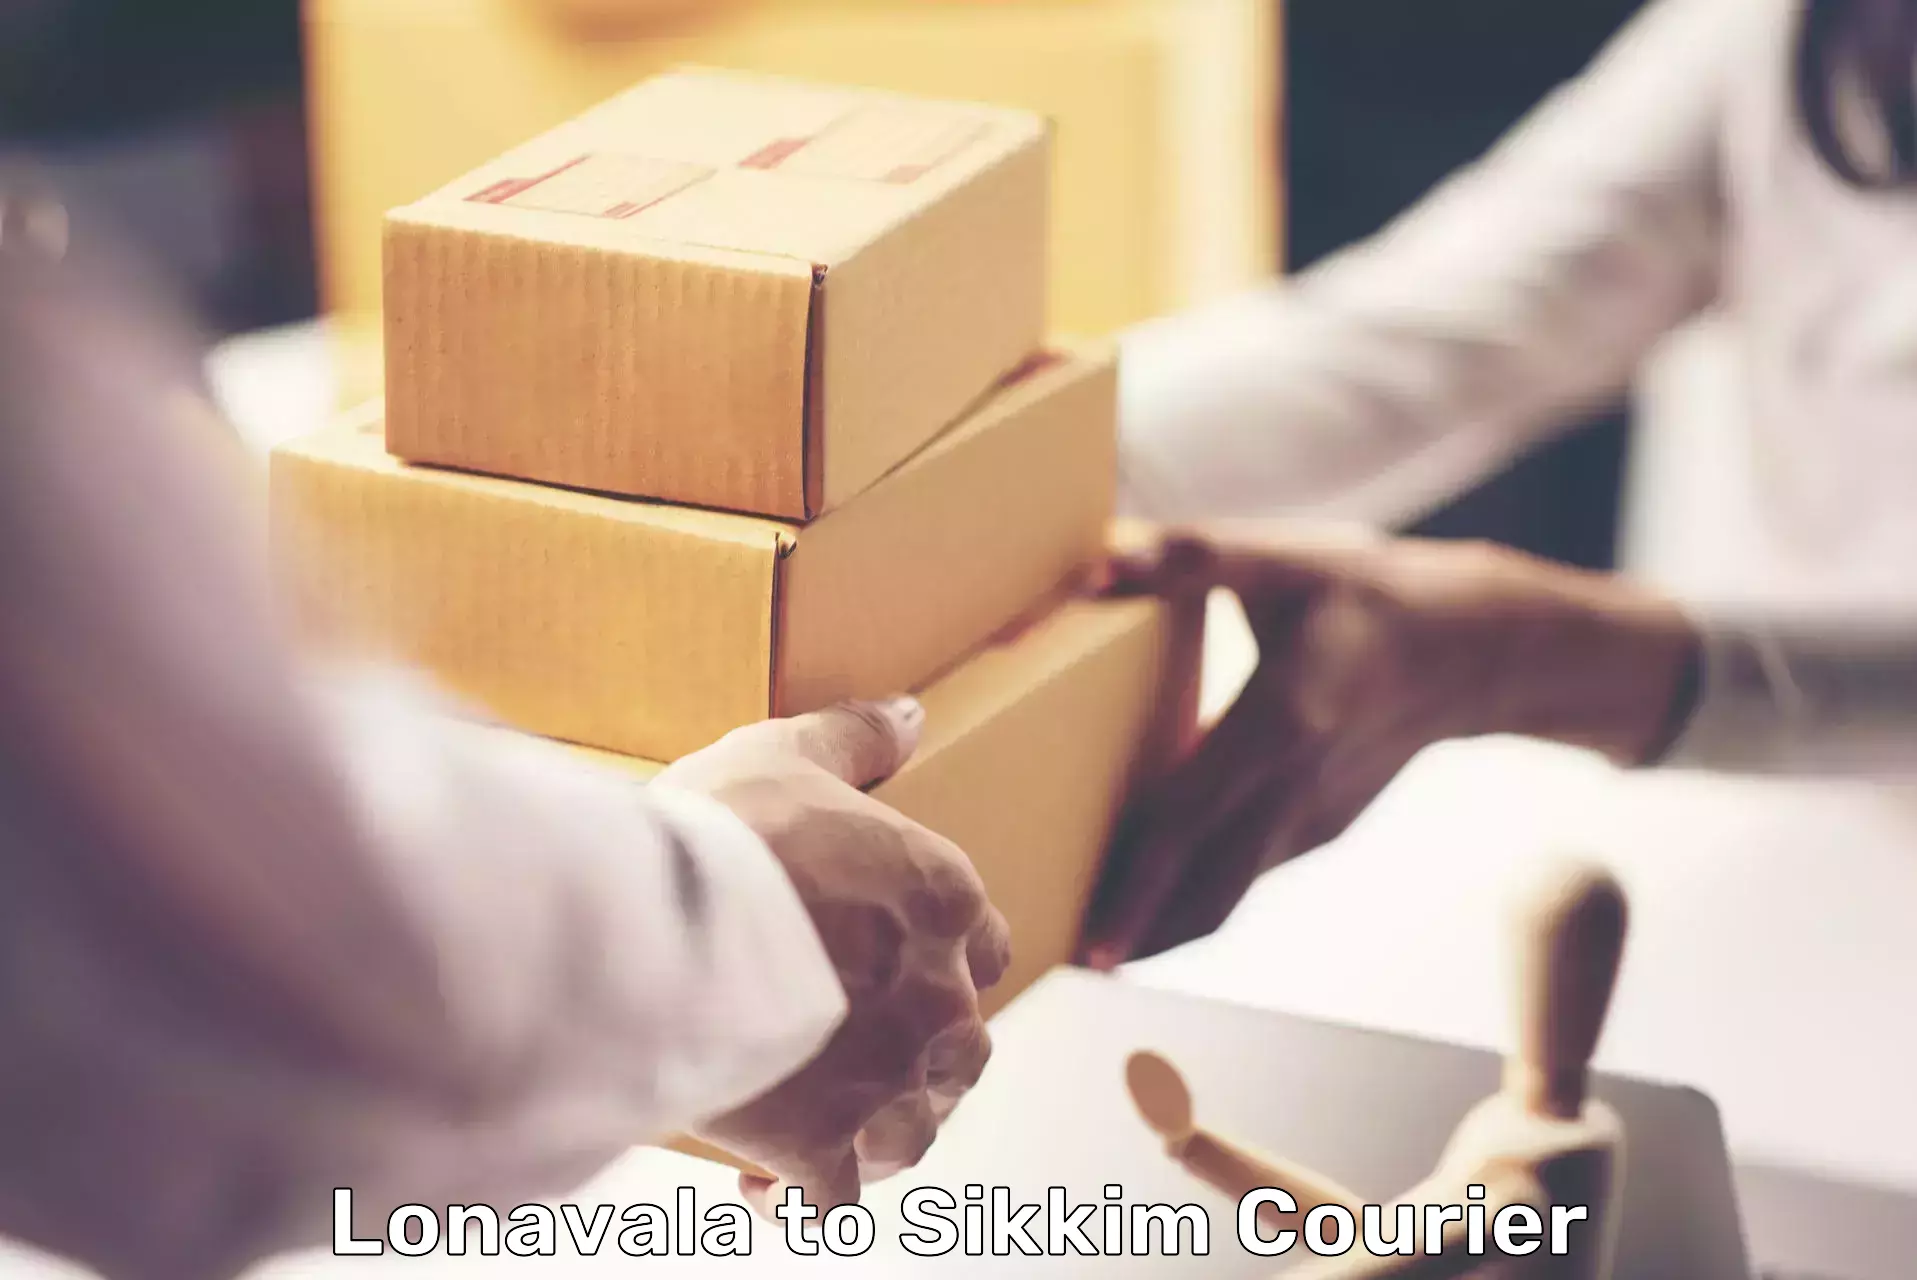 Courier app Lonavala to East Sikkim